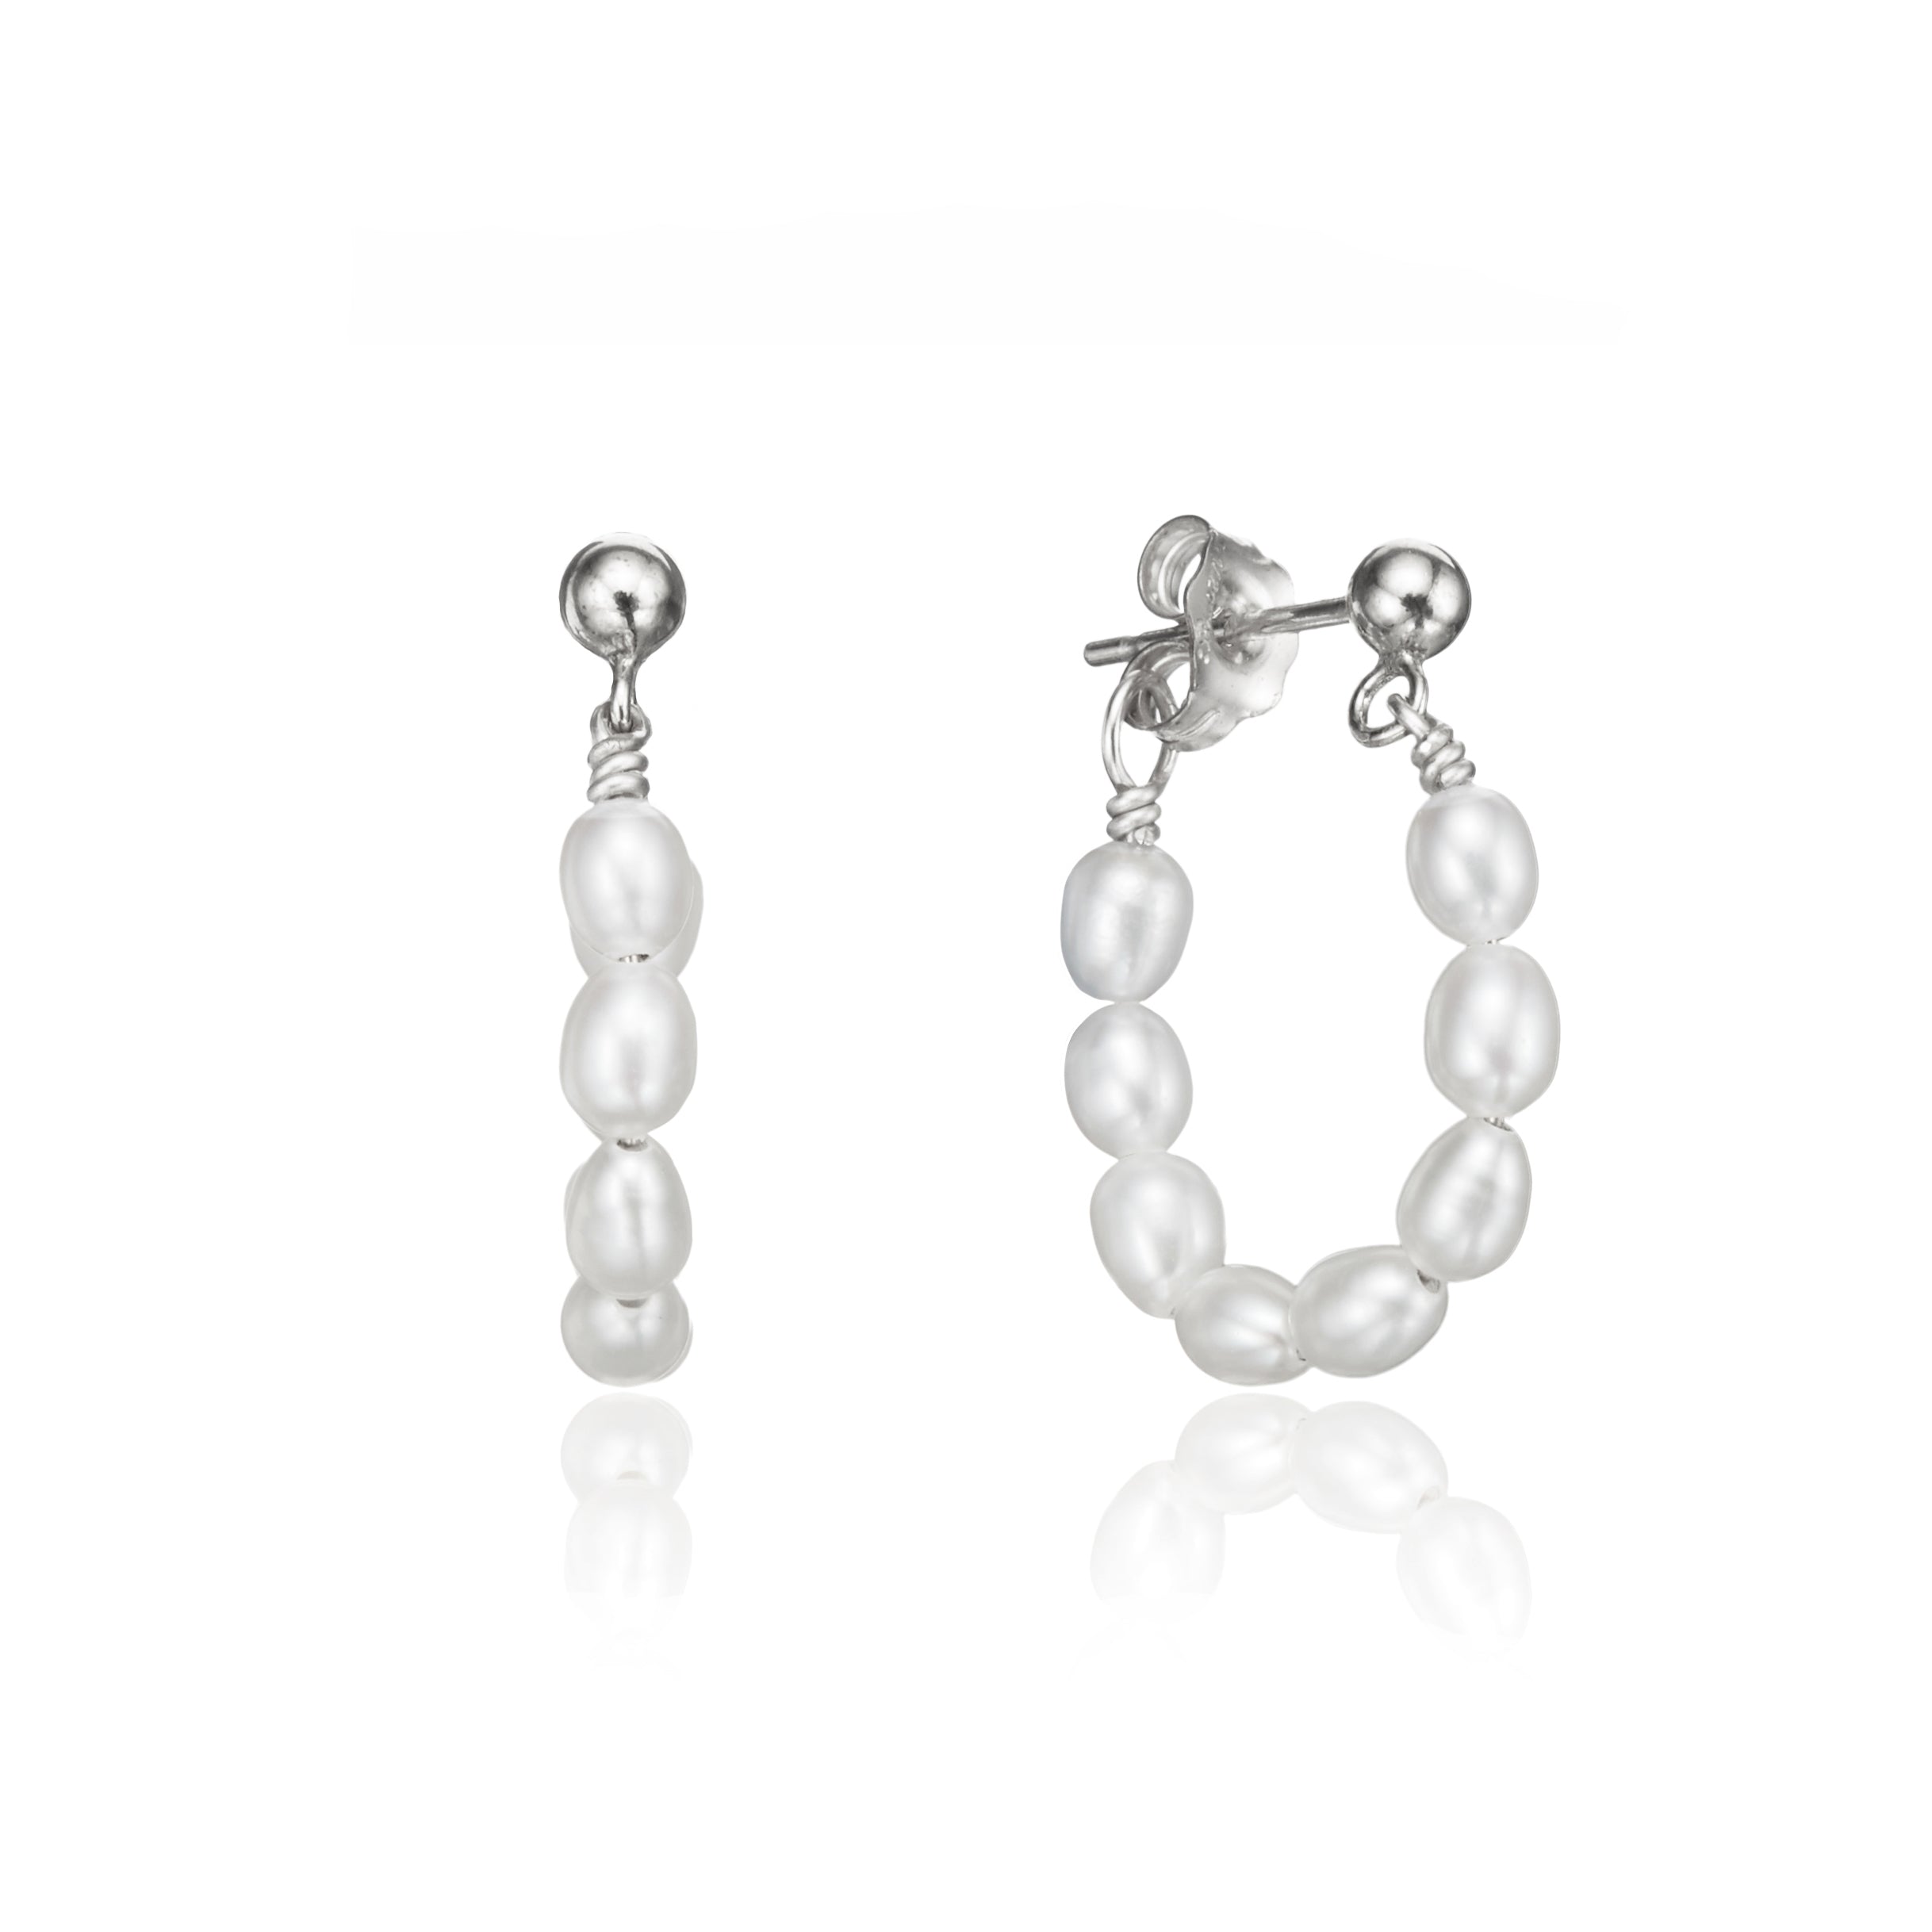 Silver seed pearl hoop earrings on a white background